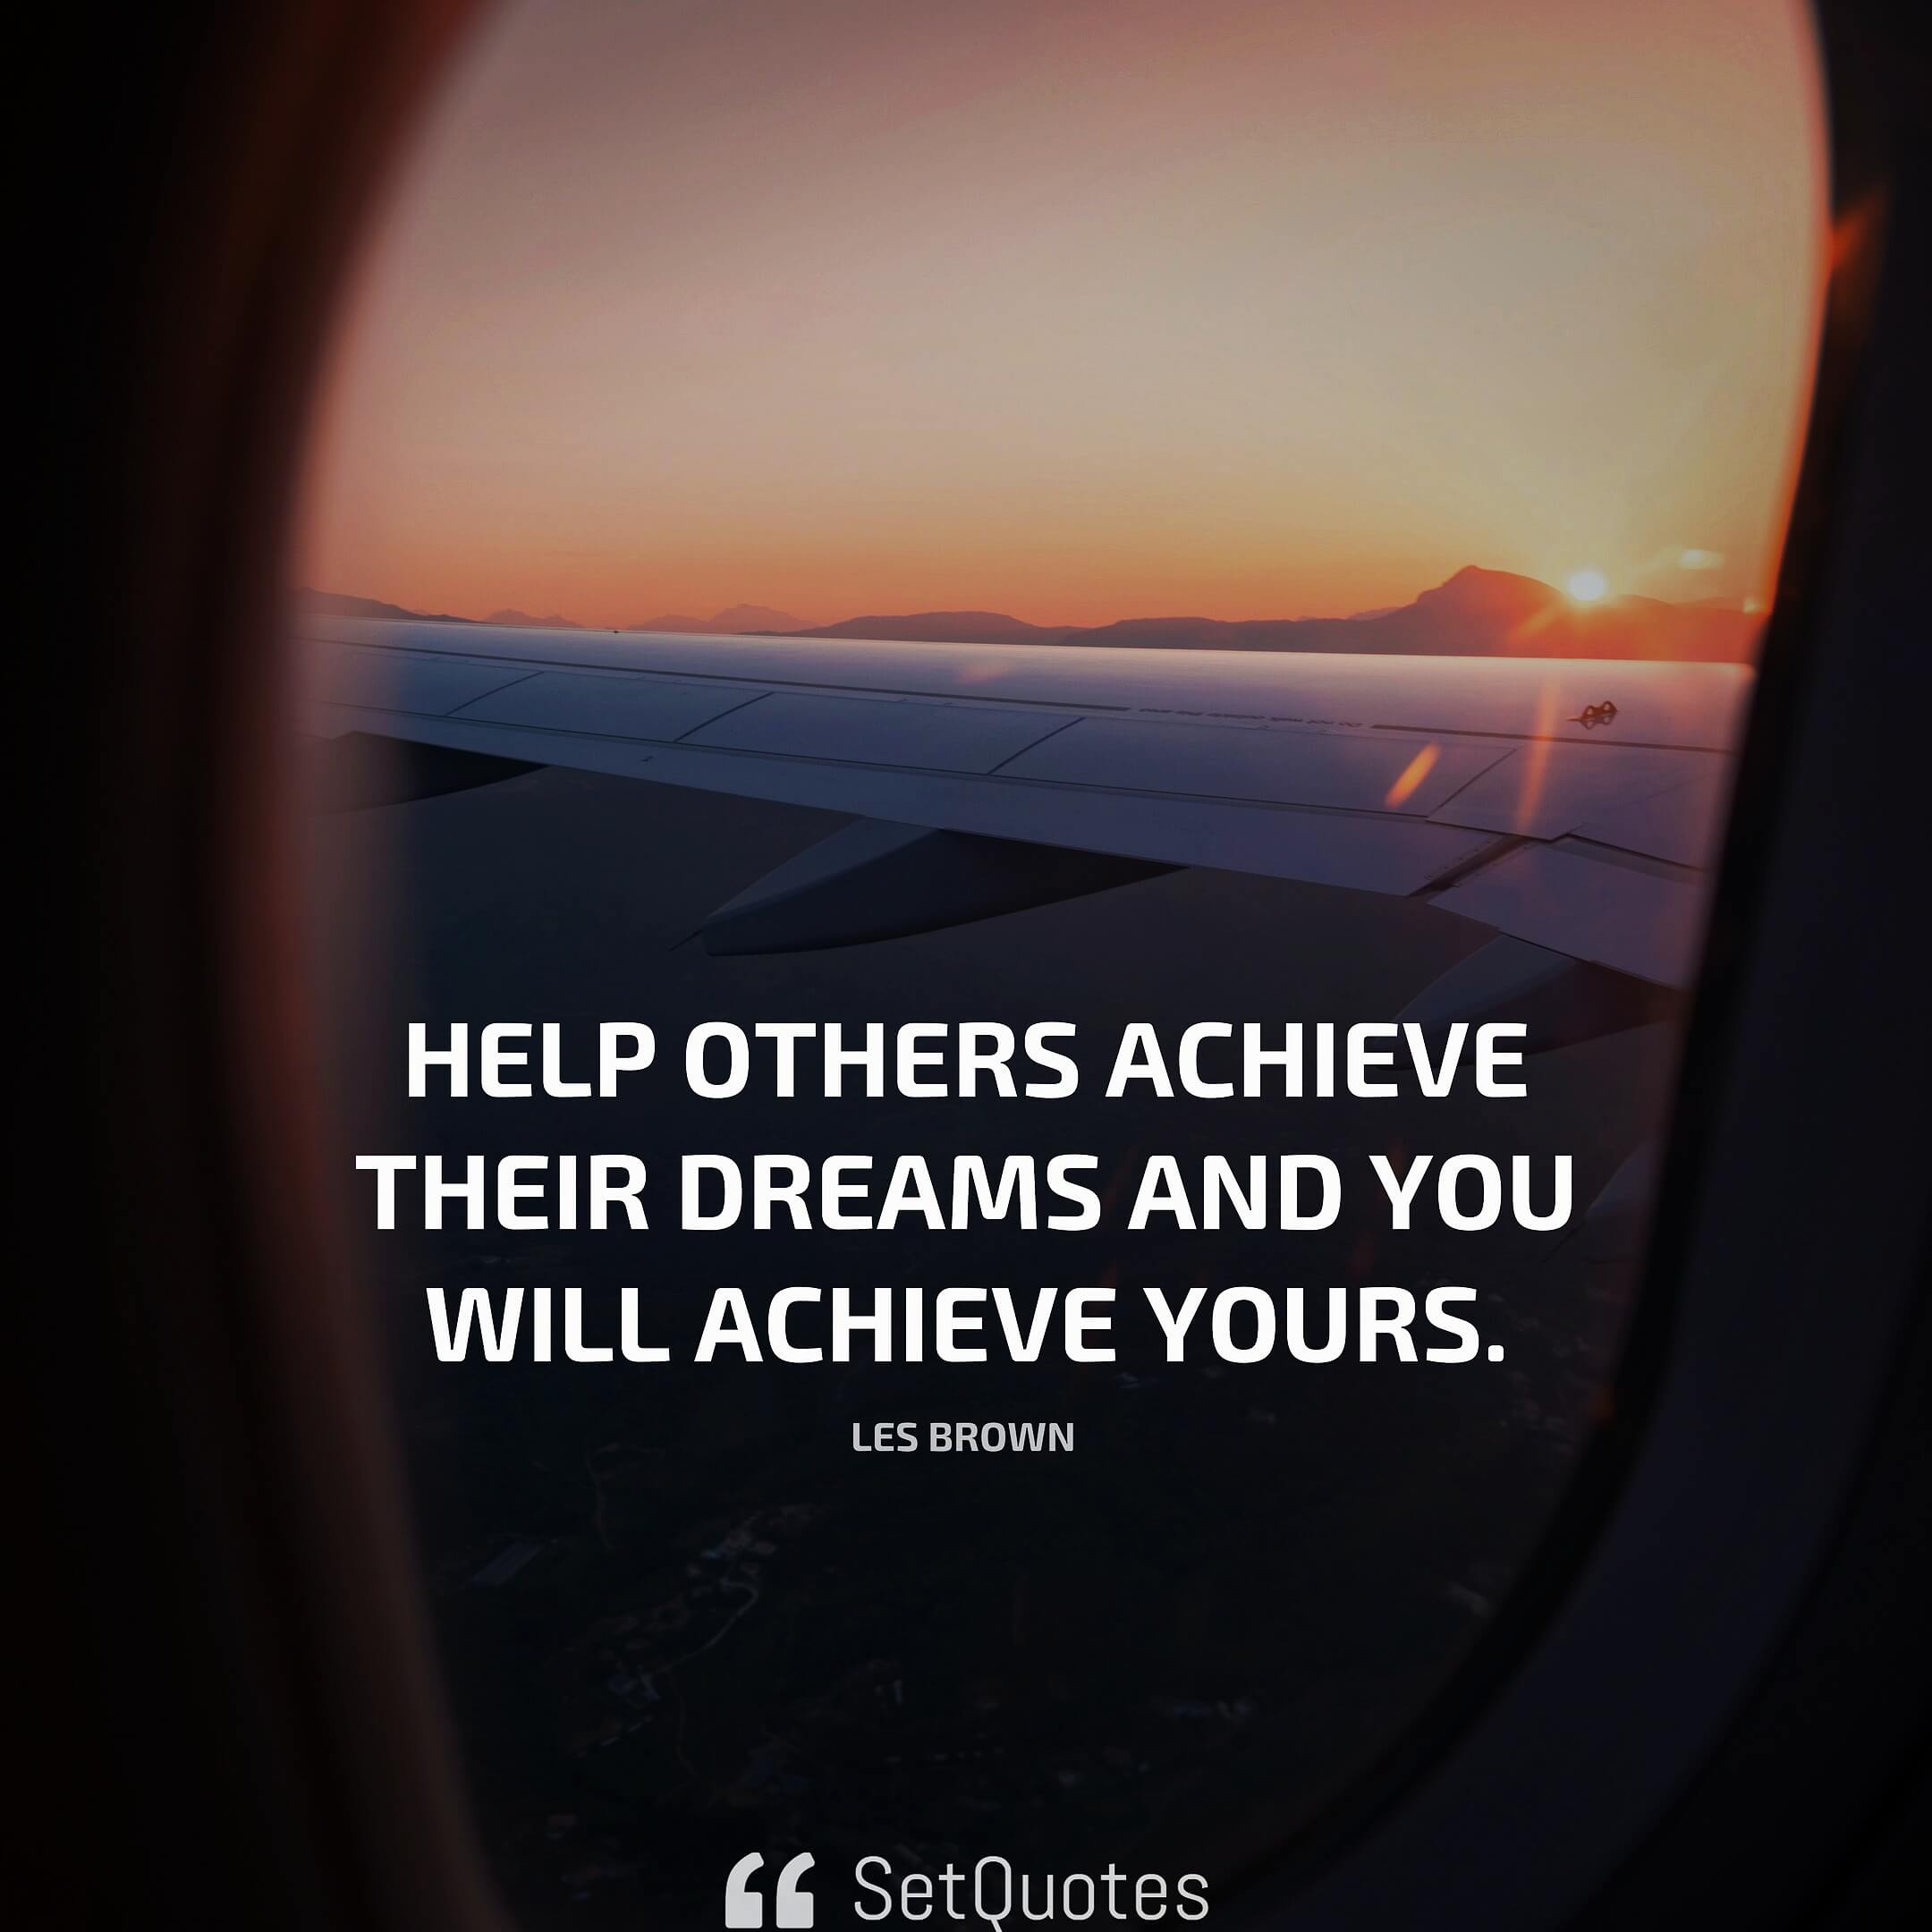 Help others achieve their dreams and you will achieve yours. - Les Brown